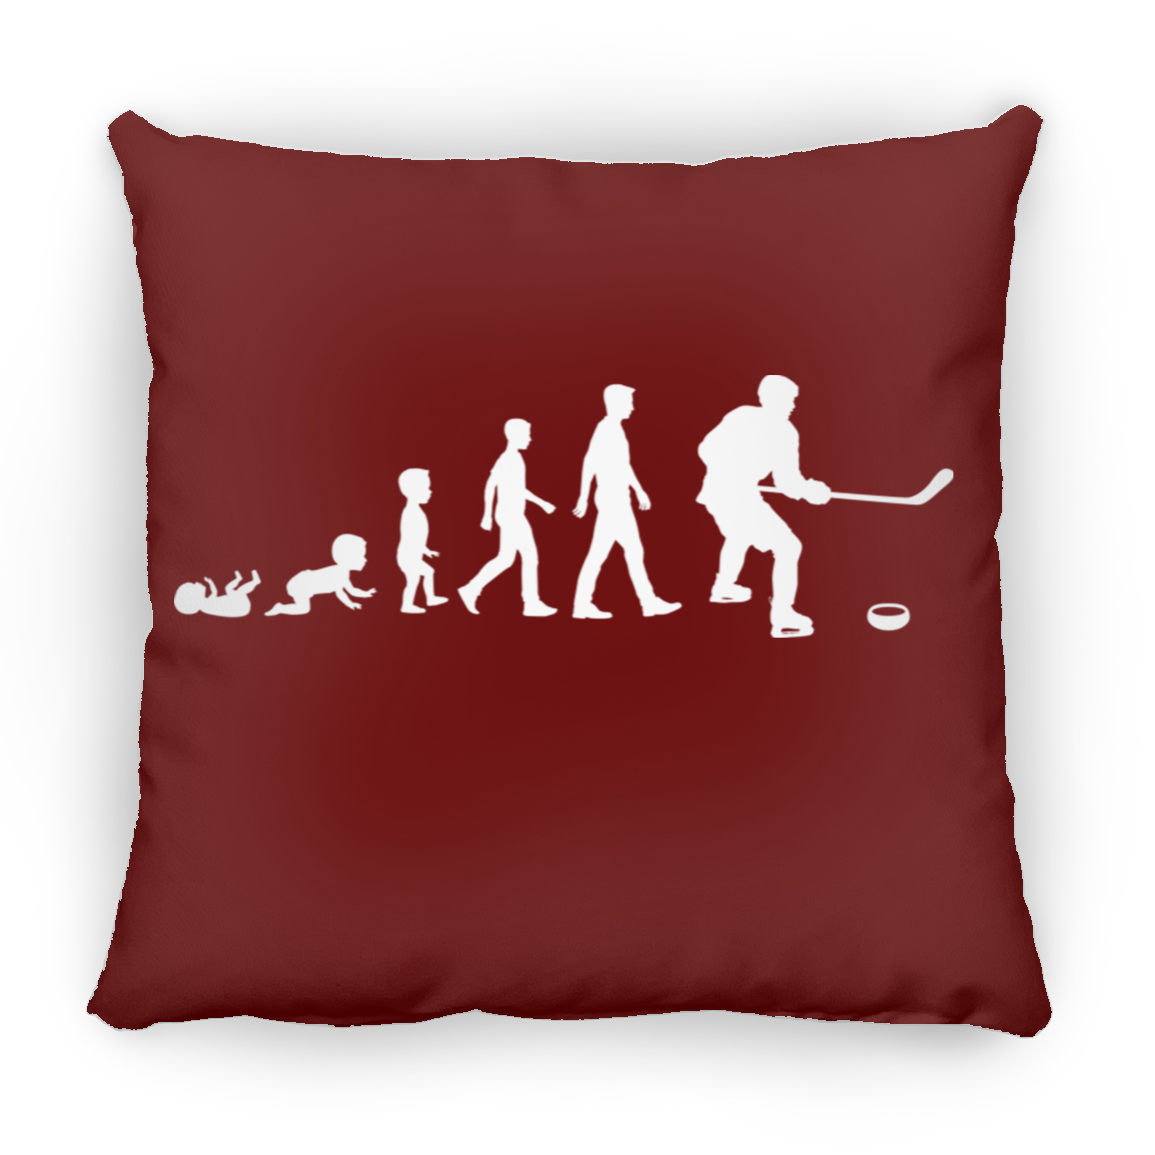 Growing up Hockey- Large Square Pillow